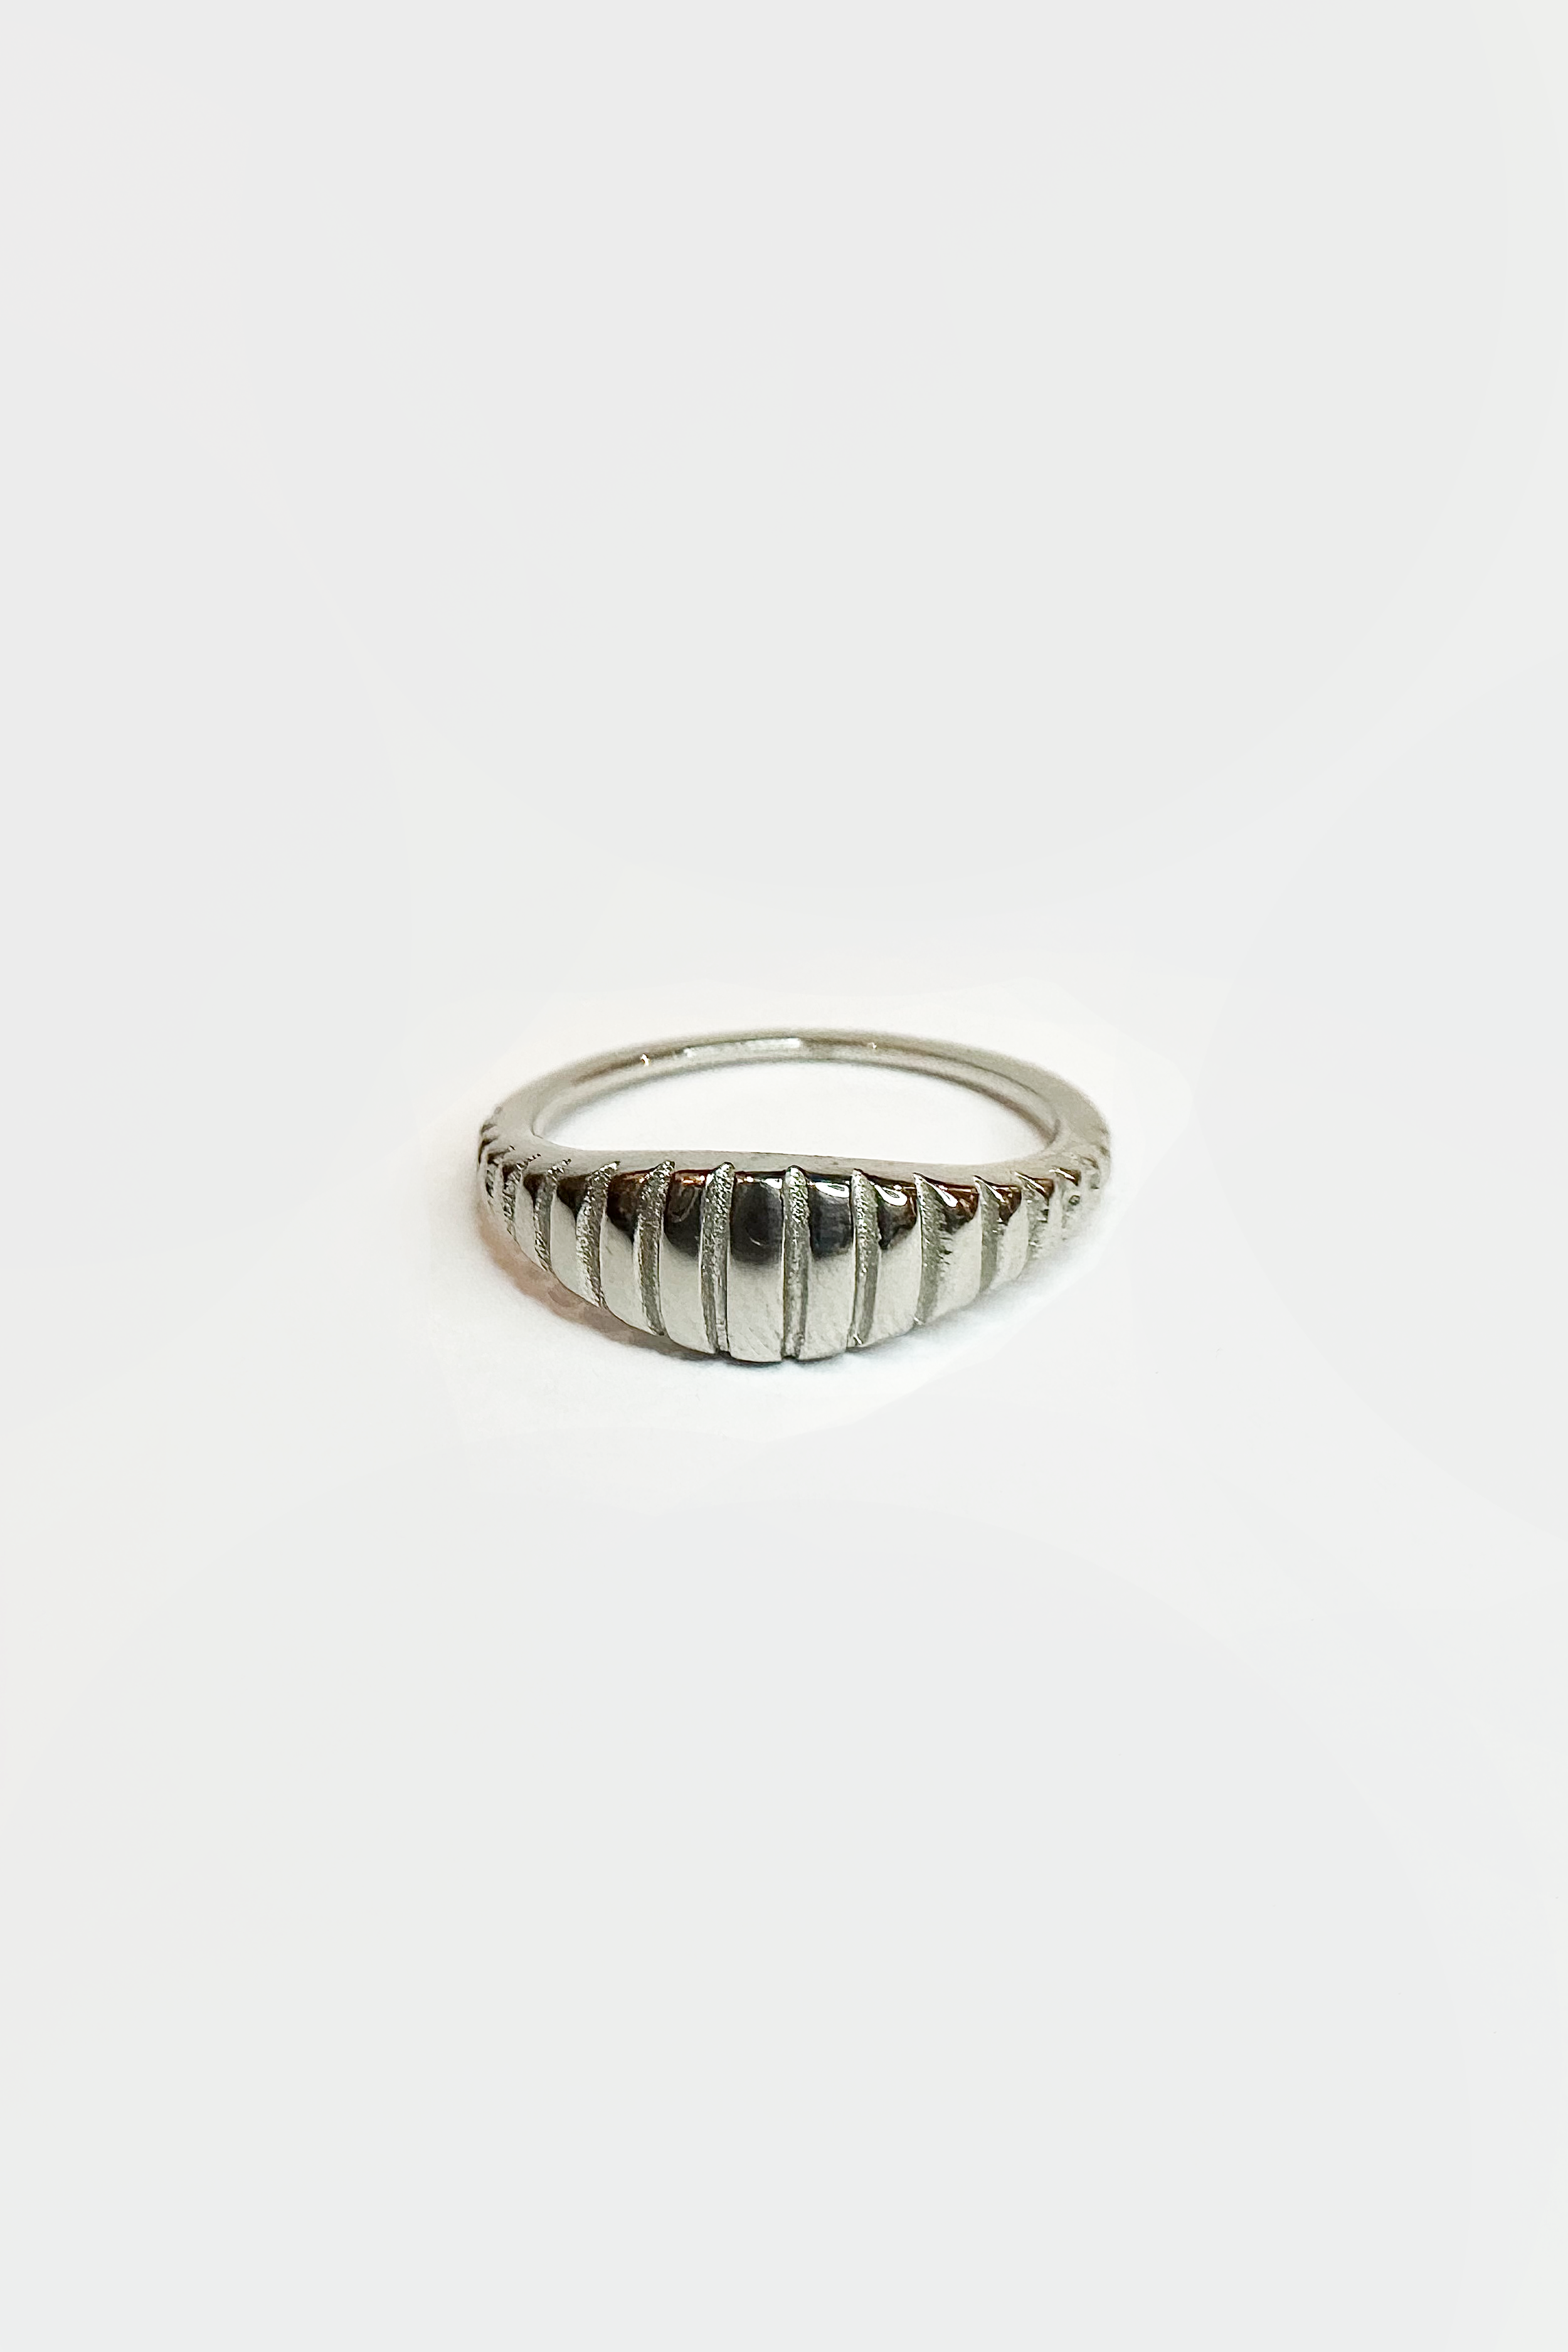 Baby Croissant Ring in Silver